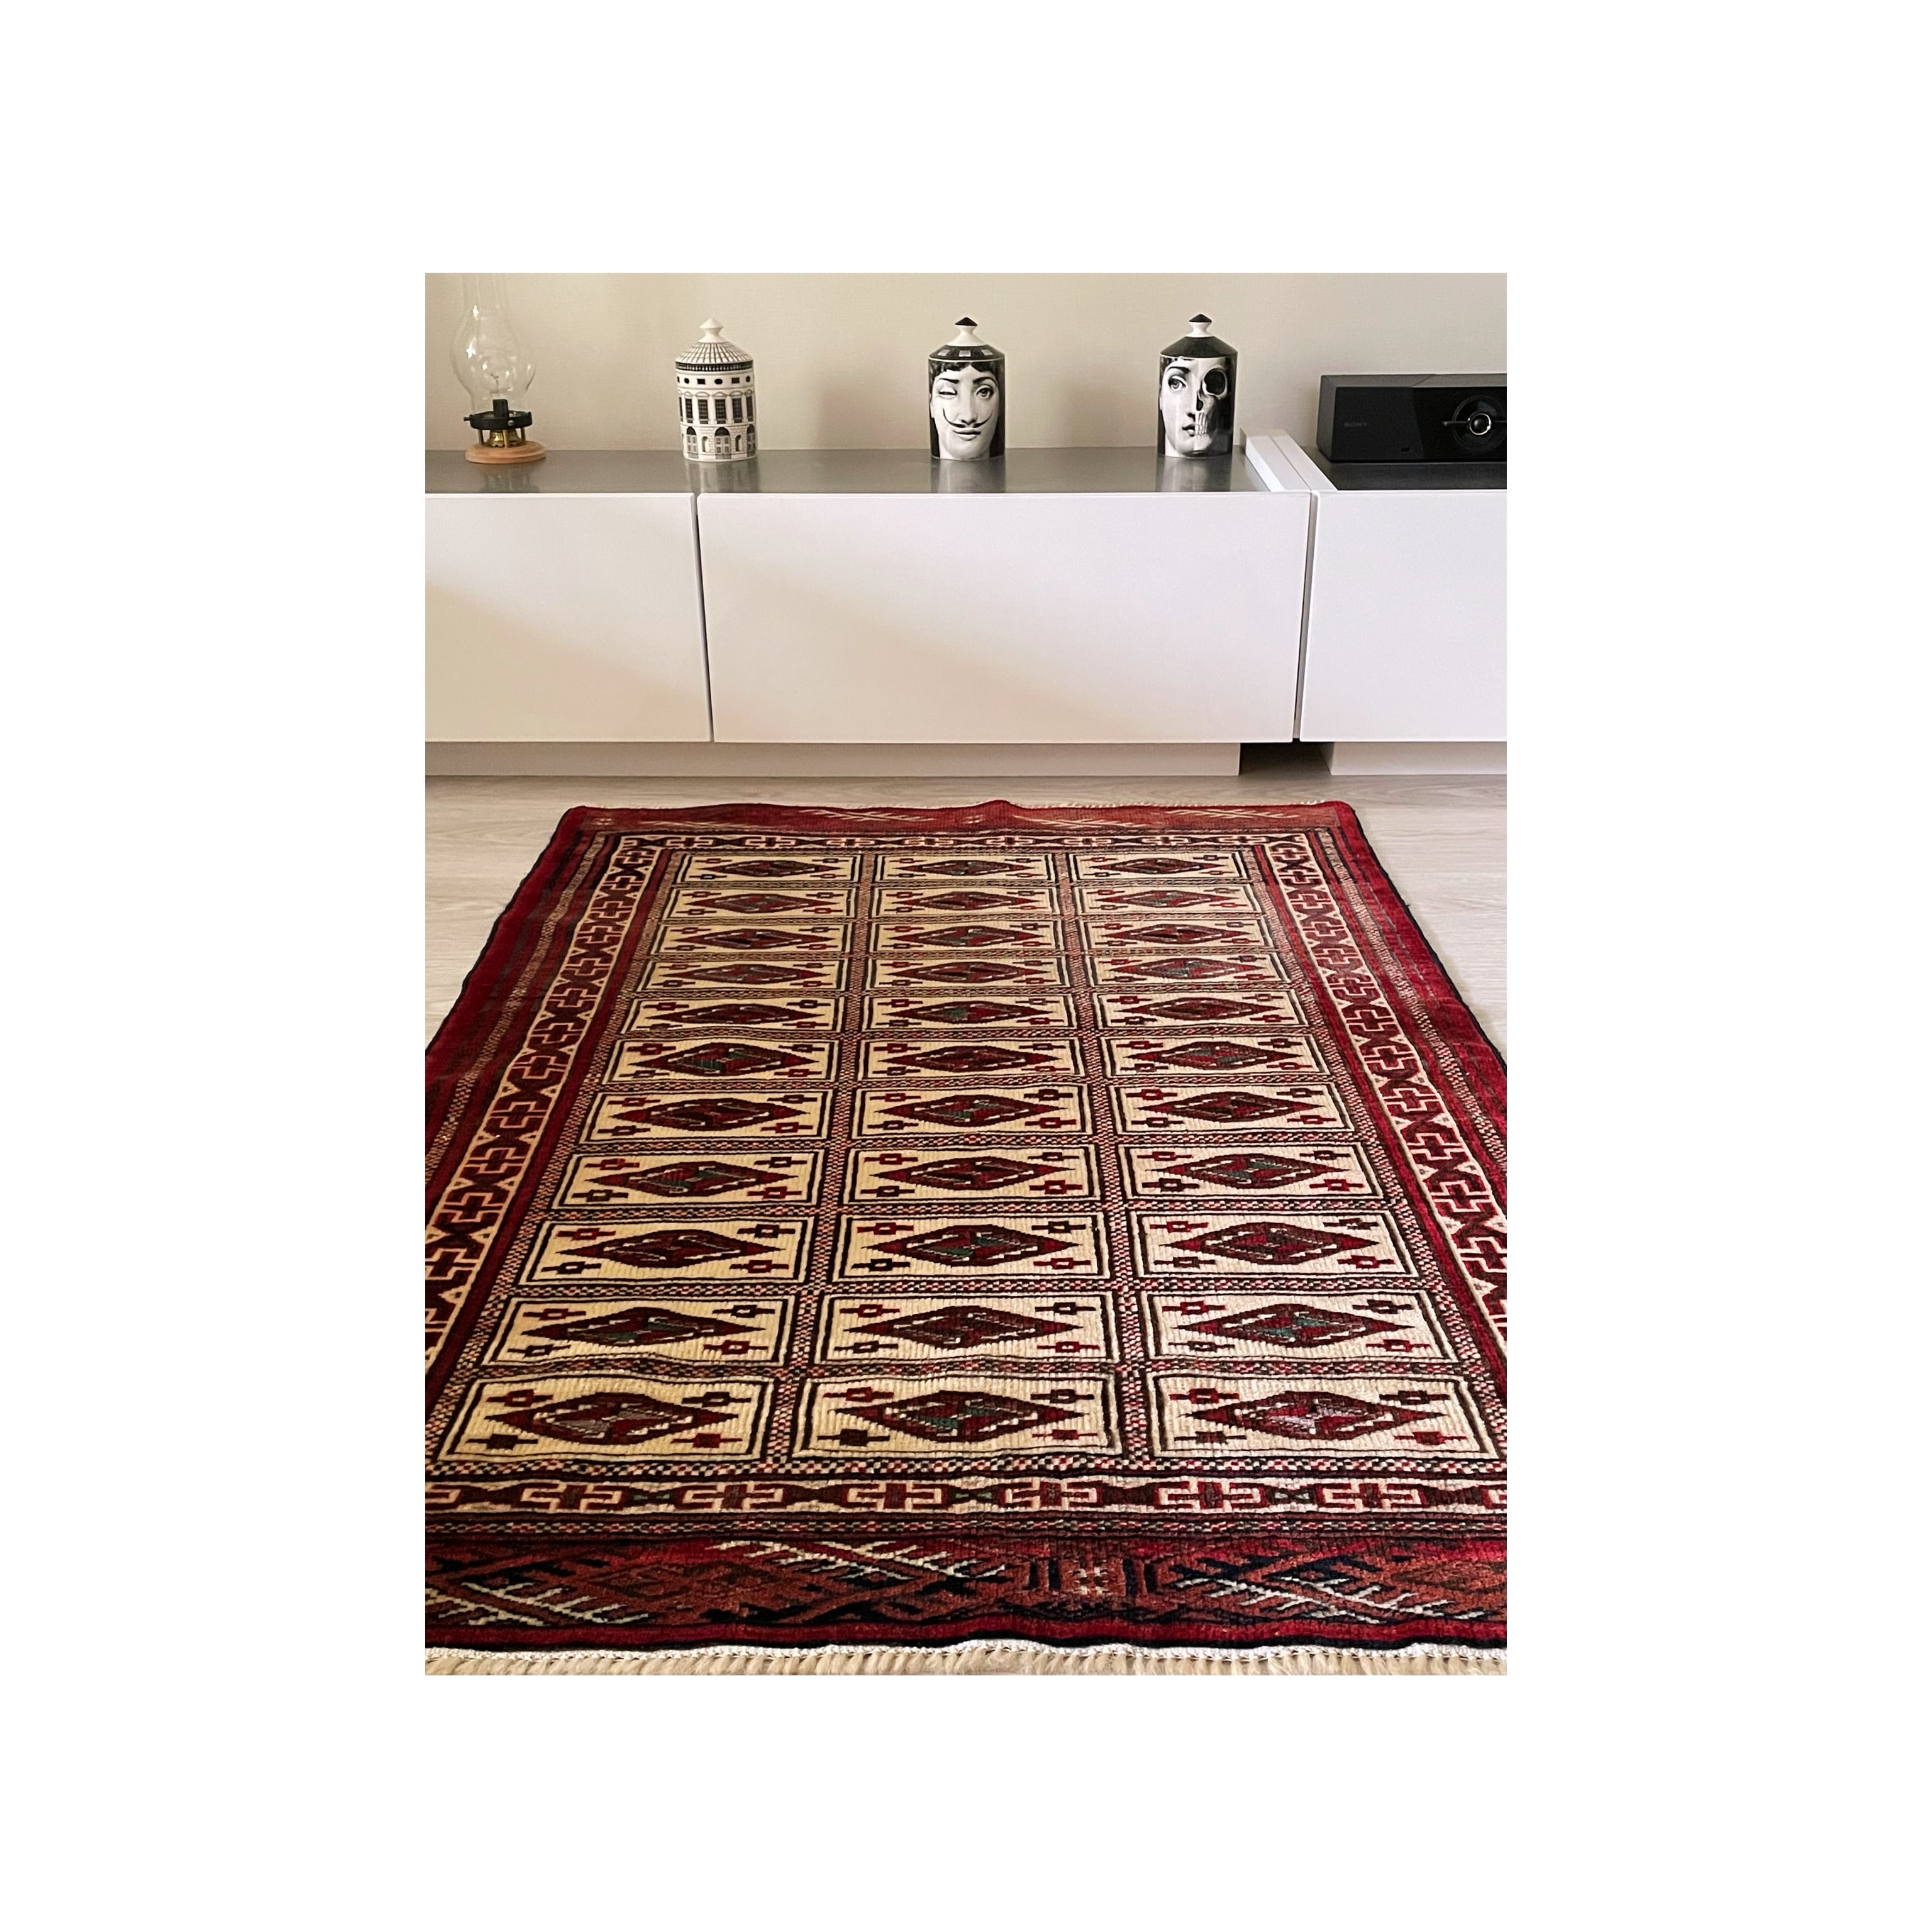 45×107"The First Star” ViNTAGE RUG